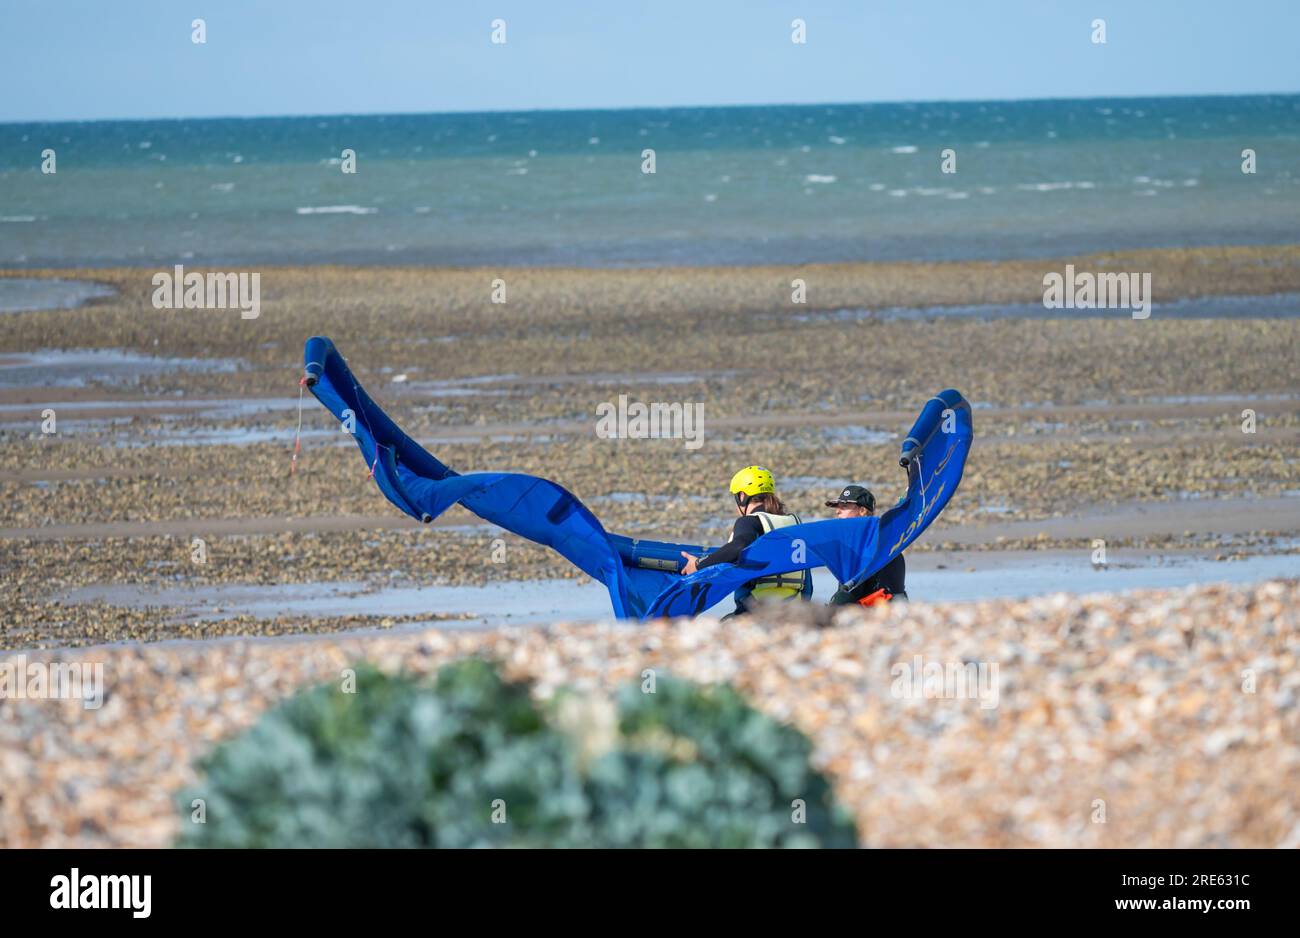 Kitesurfer or kite surfer struggling in wind on a beach carrying a large kite for kitesurfing on a windy Summer day at the seaside in England, UK. Stock Photo